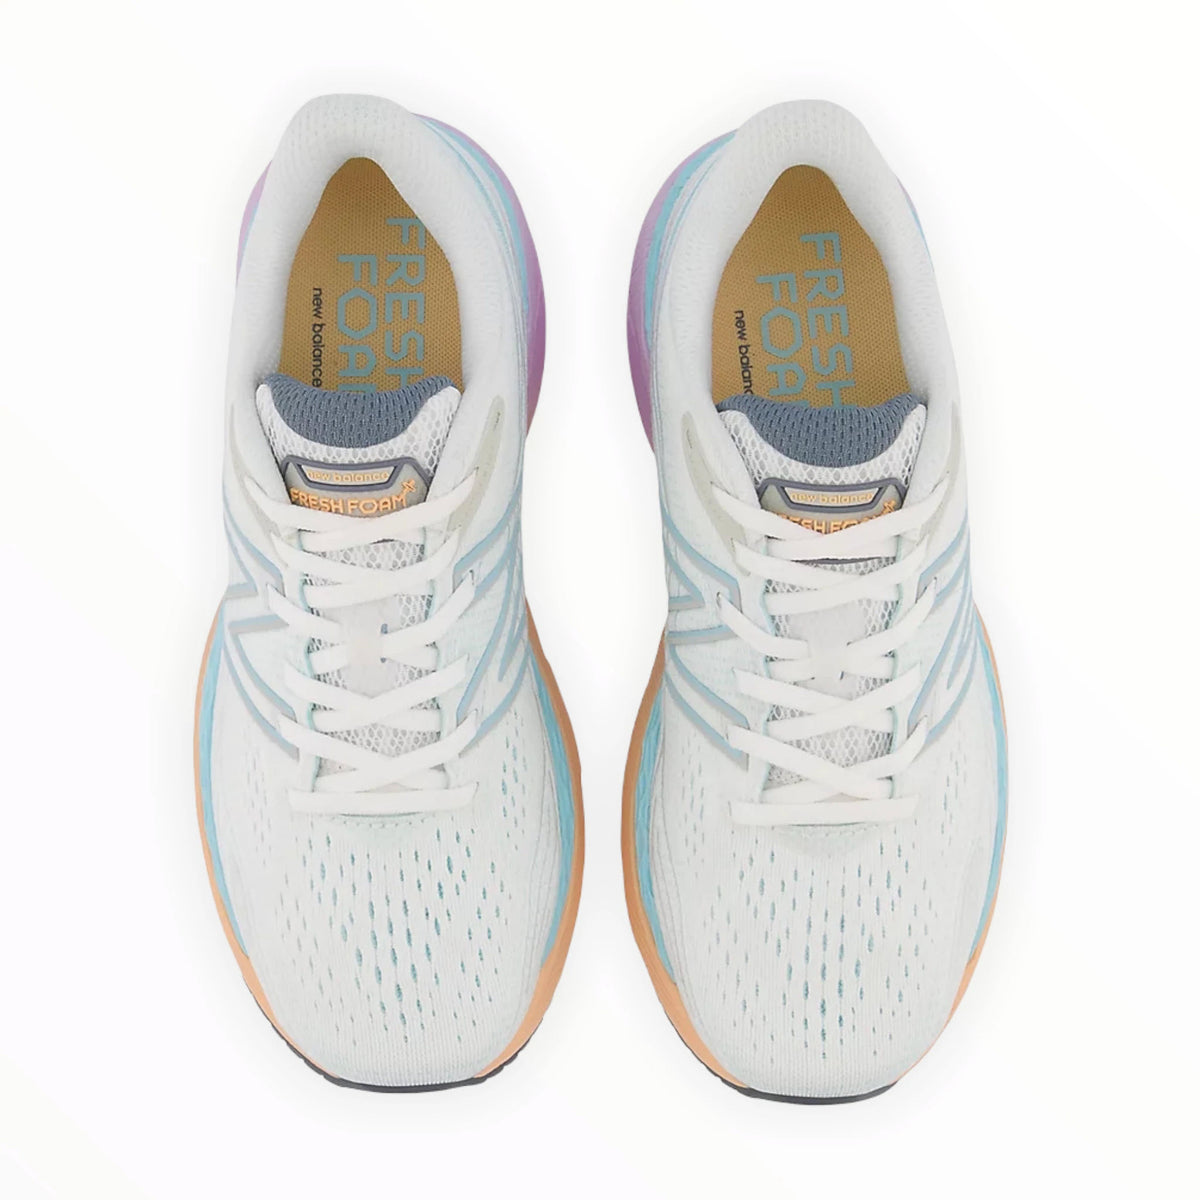 A pair of New Balance 860V12 stability running shoes with white laces, light blue and white uppers, and orange soles, viewed from above.